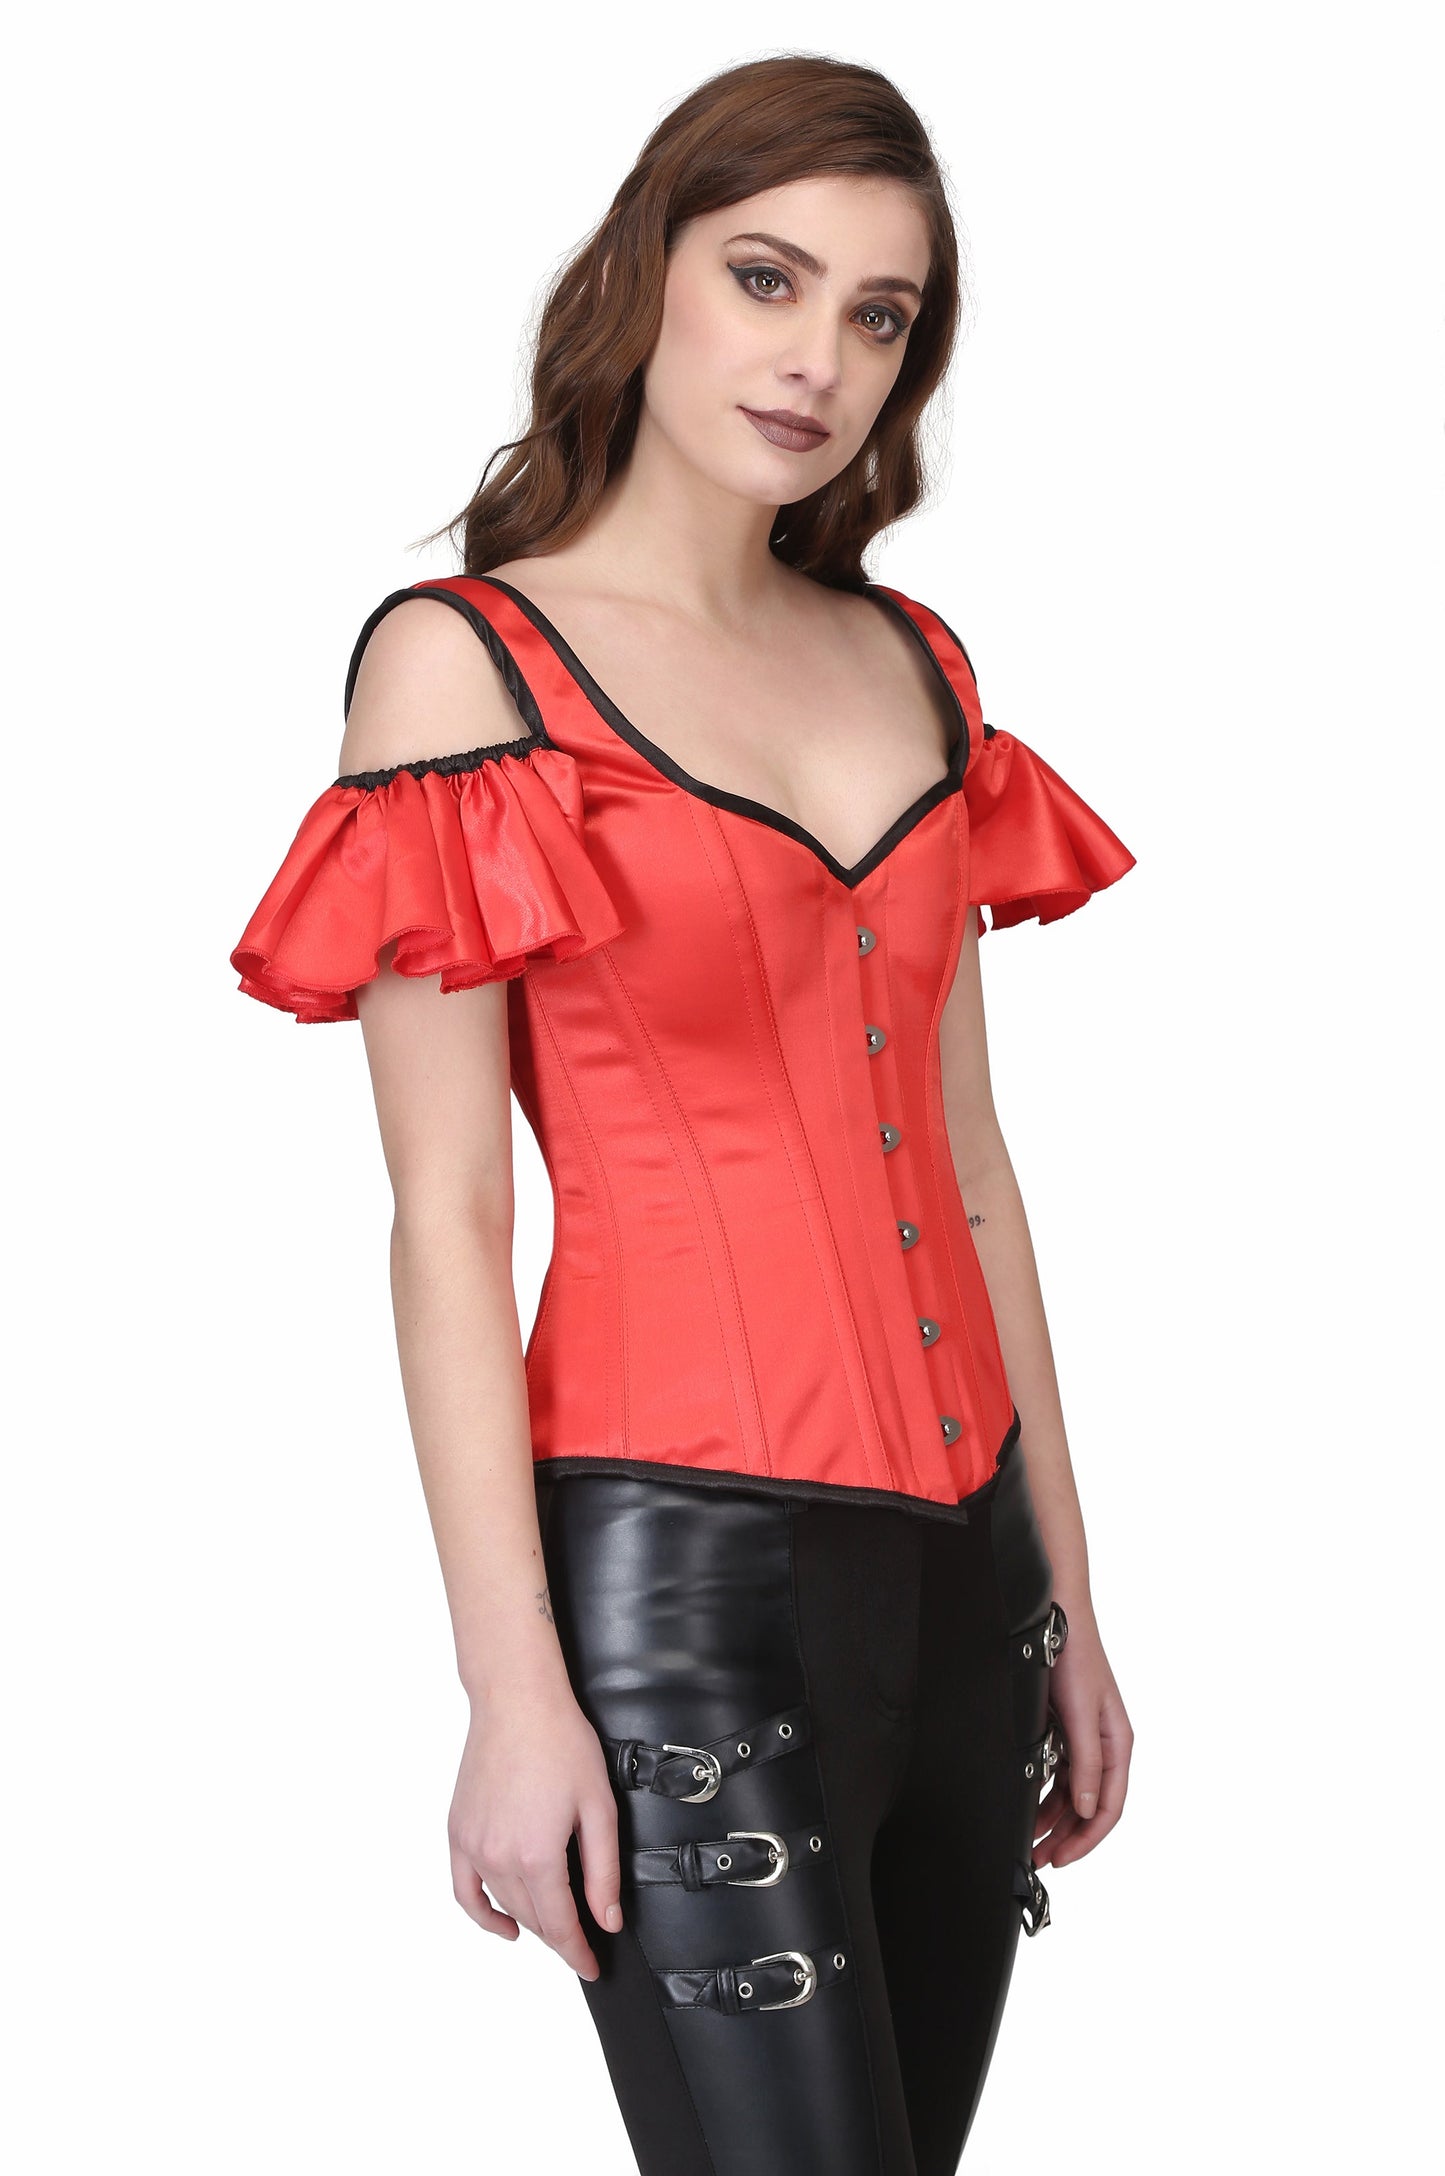 Red Gothic Overbust Corset - Corset Revolution